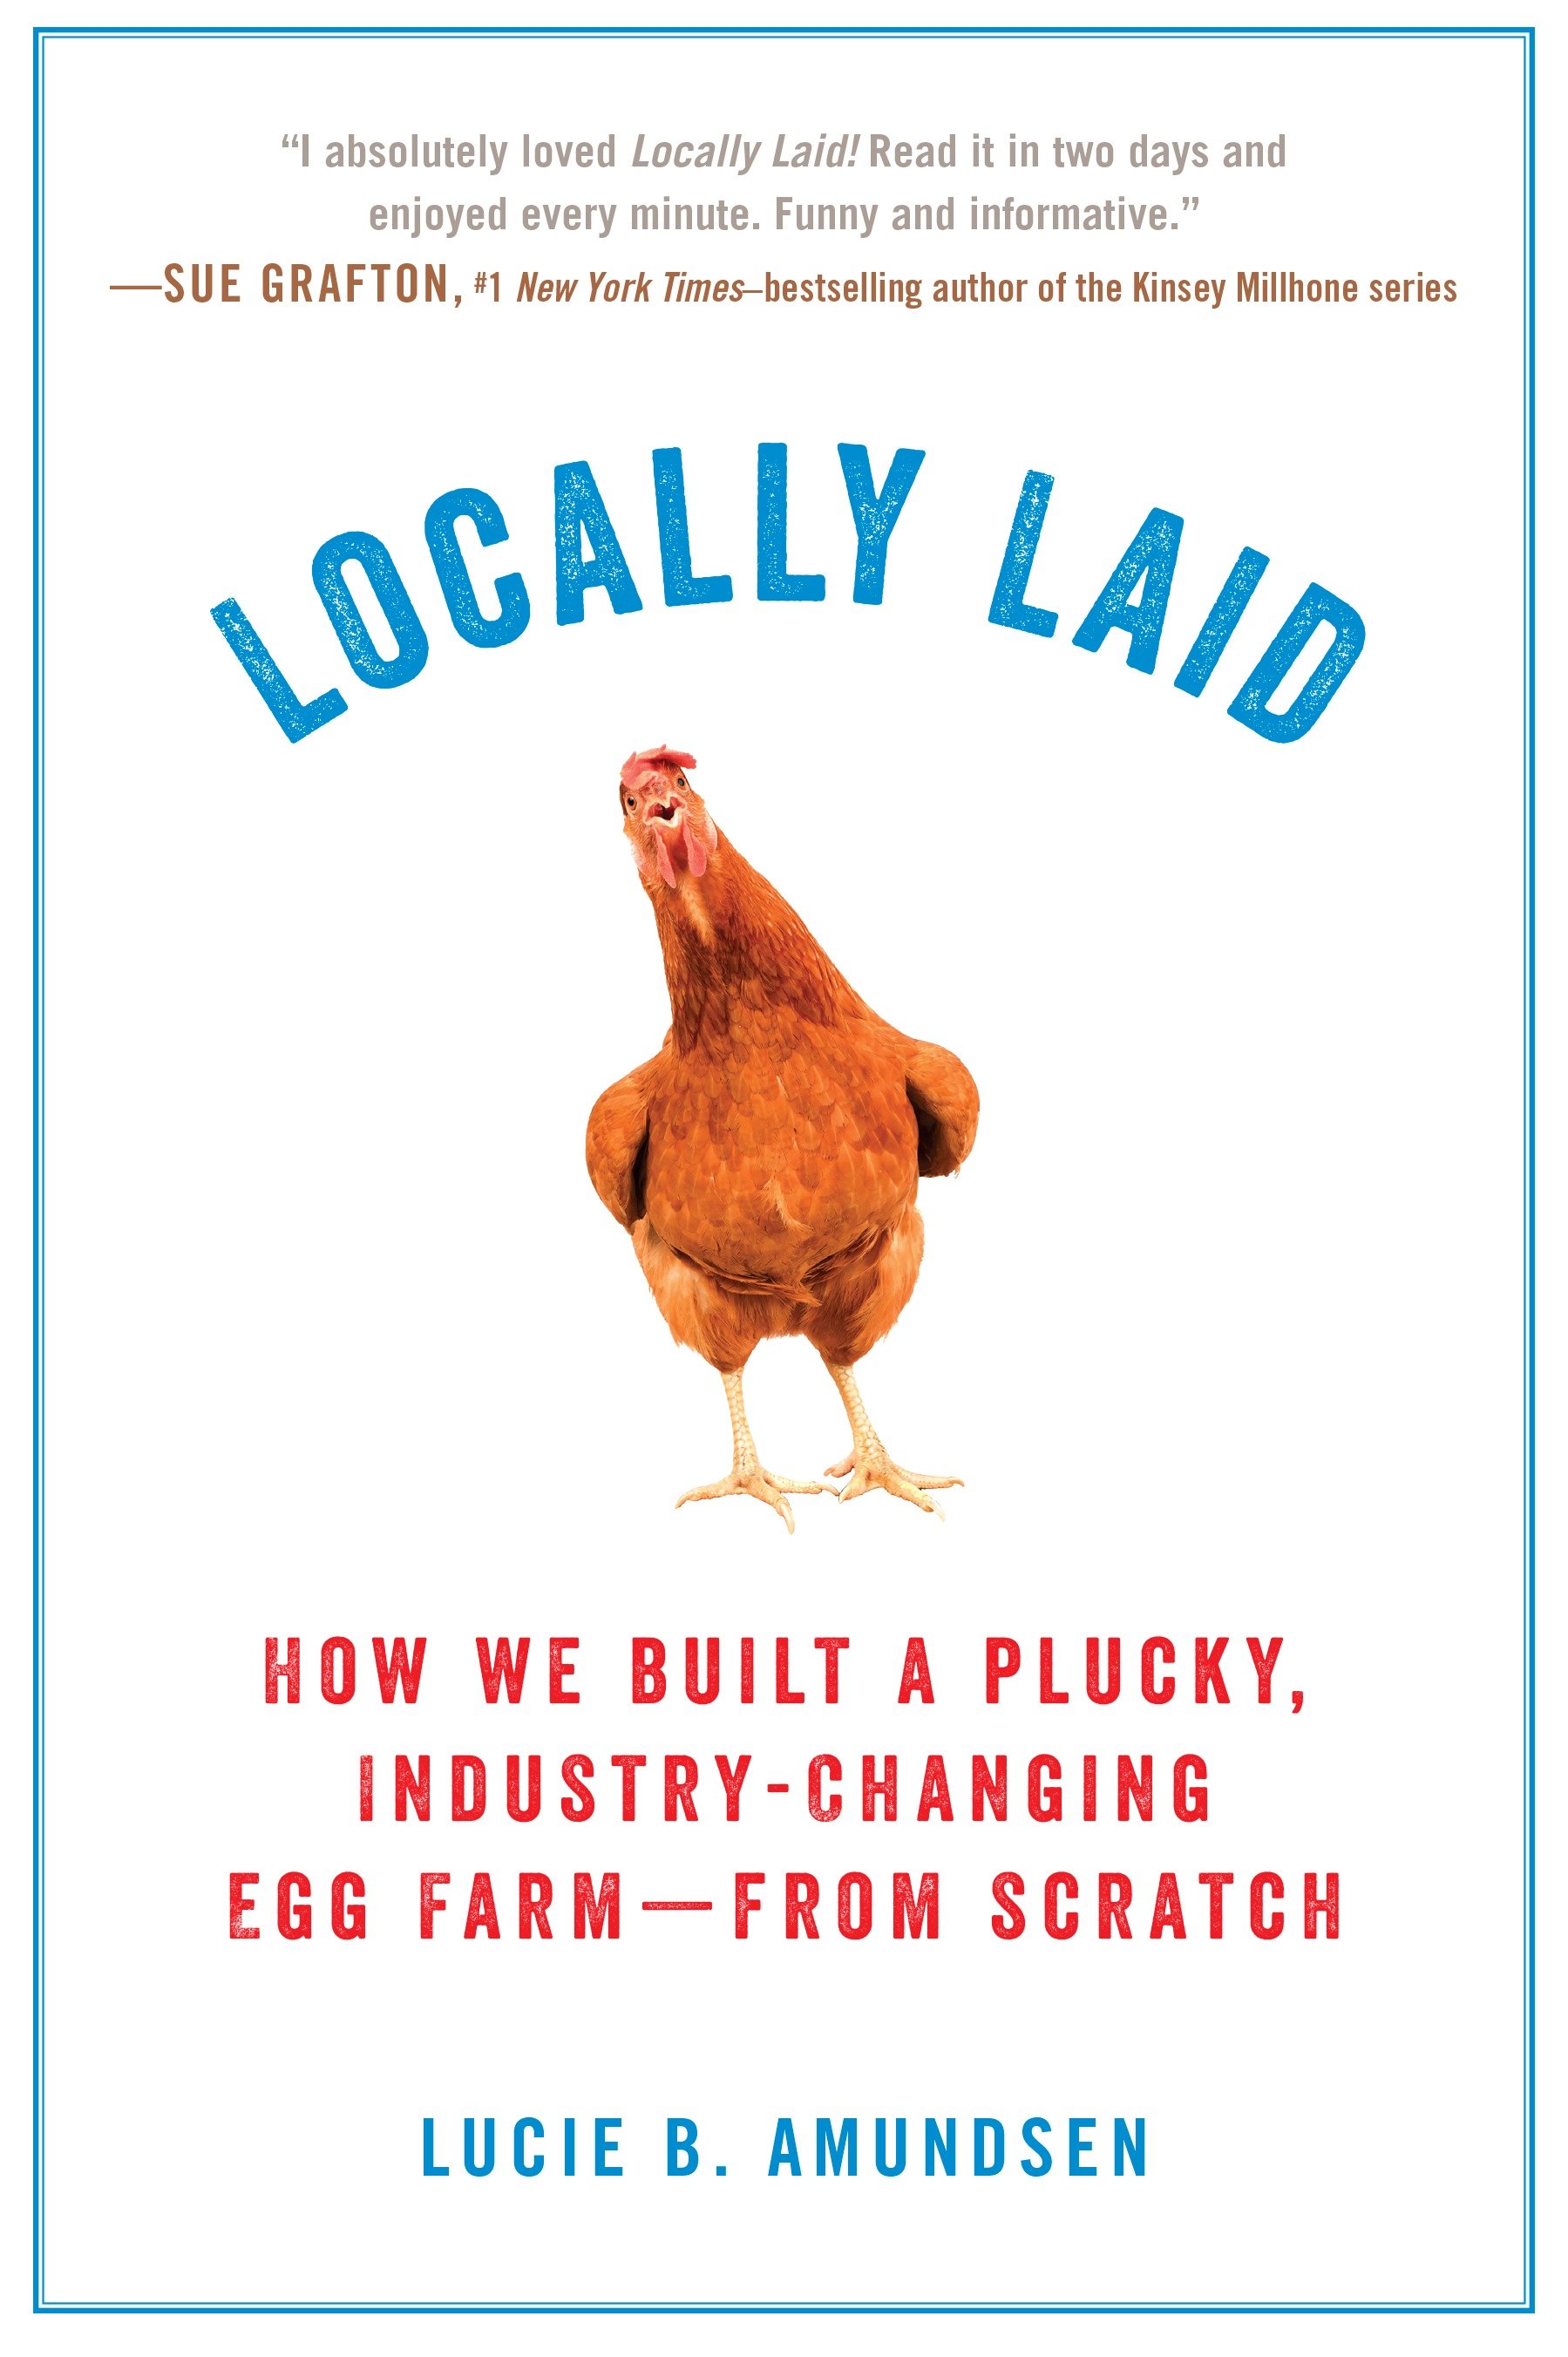 Image de couverture de Locally Laid [electronic resource] : How We Built a Plucky, Industry-changing Egg Farm - from Scratch